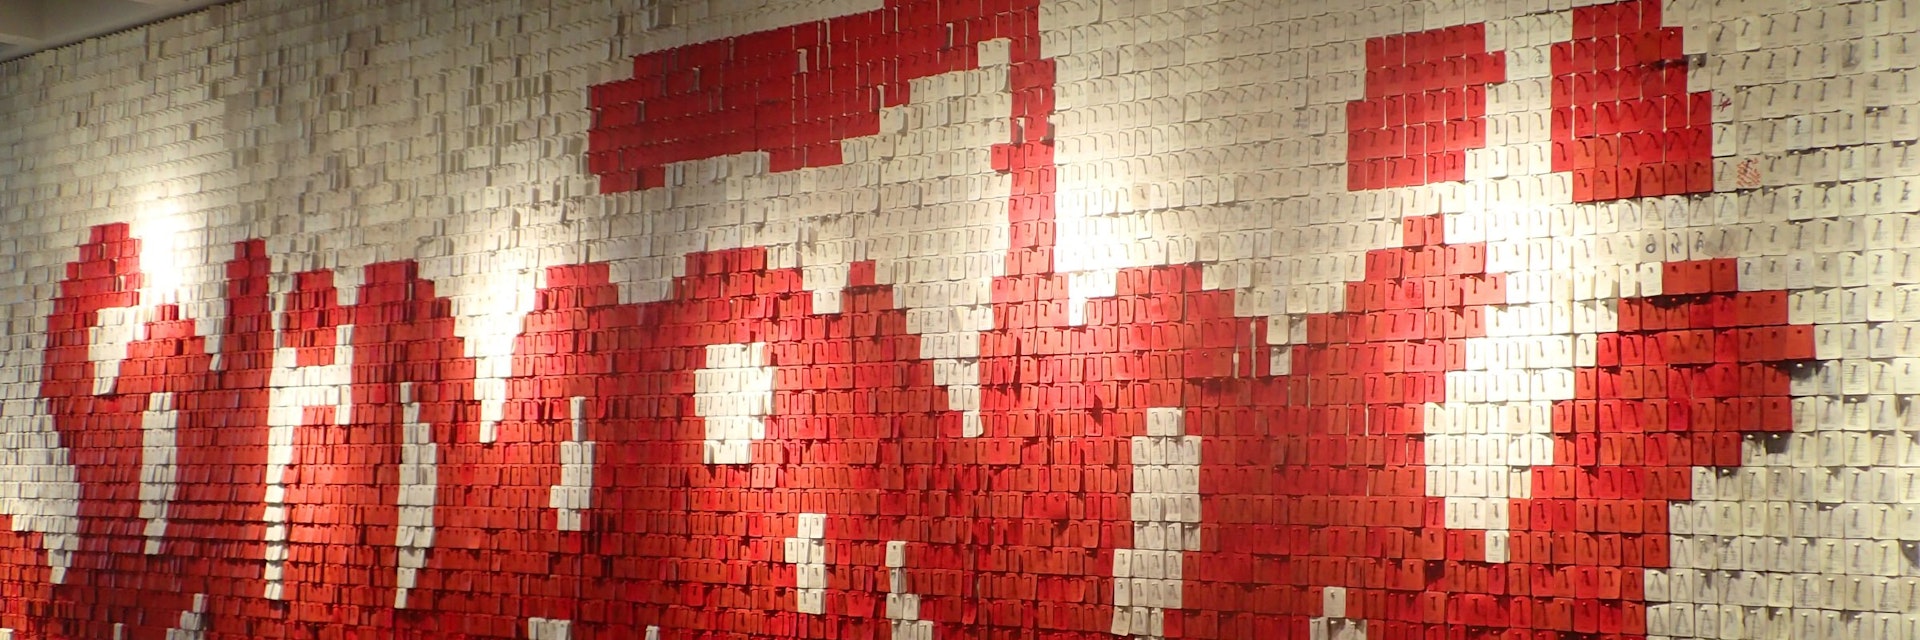 Wall spelling out the Solidarity logo in Polish, composed of small red and white pieces of card.